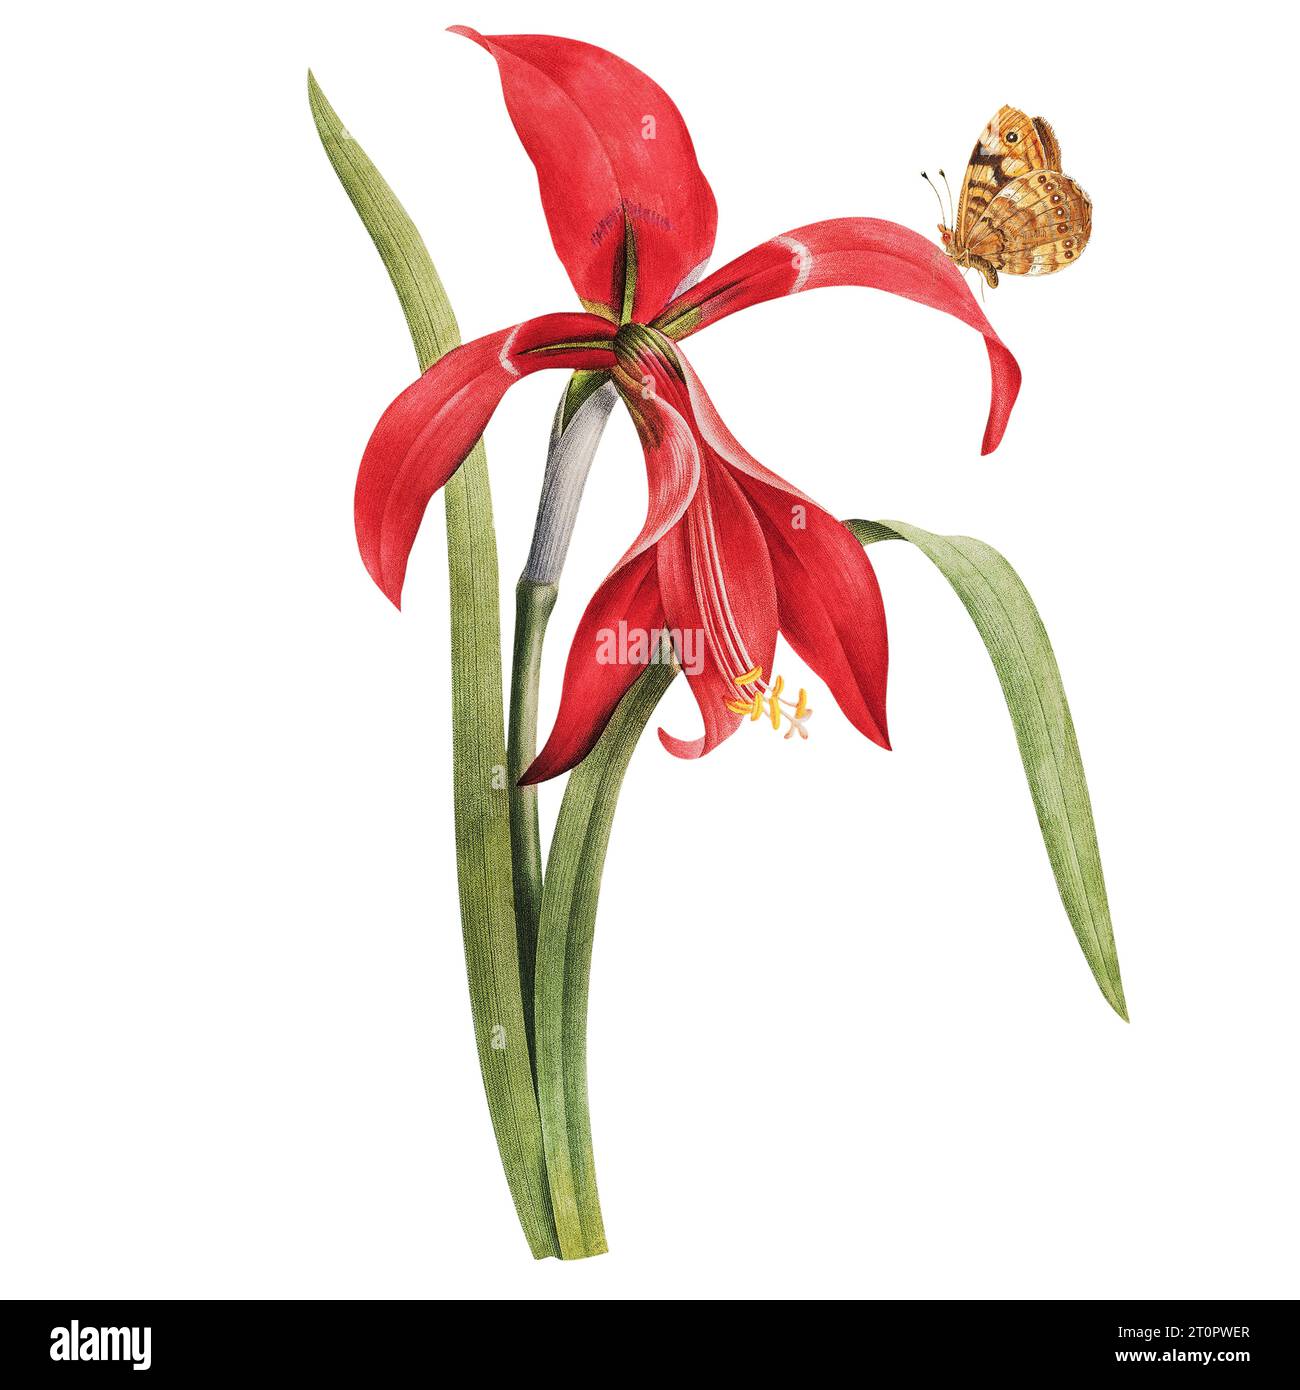 Amaryllis illustration by Pierre-Joseph Redoute, royal botanical artist to queens and empresses of France, nicknamed The Raphael of Flowers Stock Photo